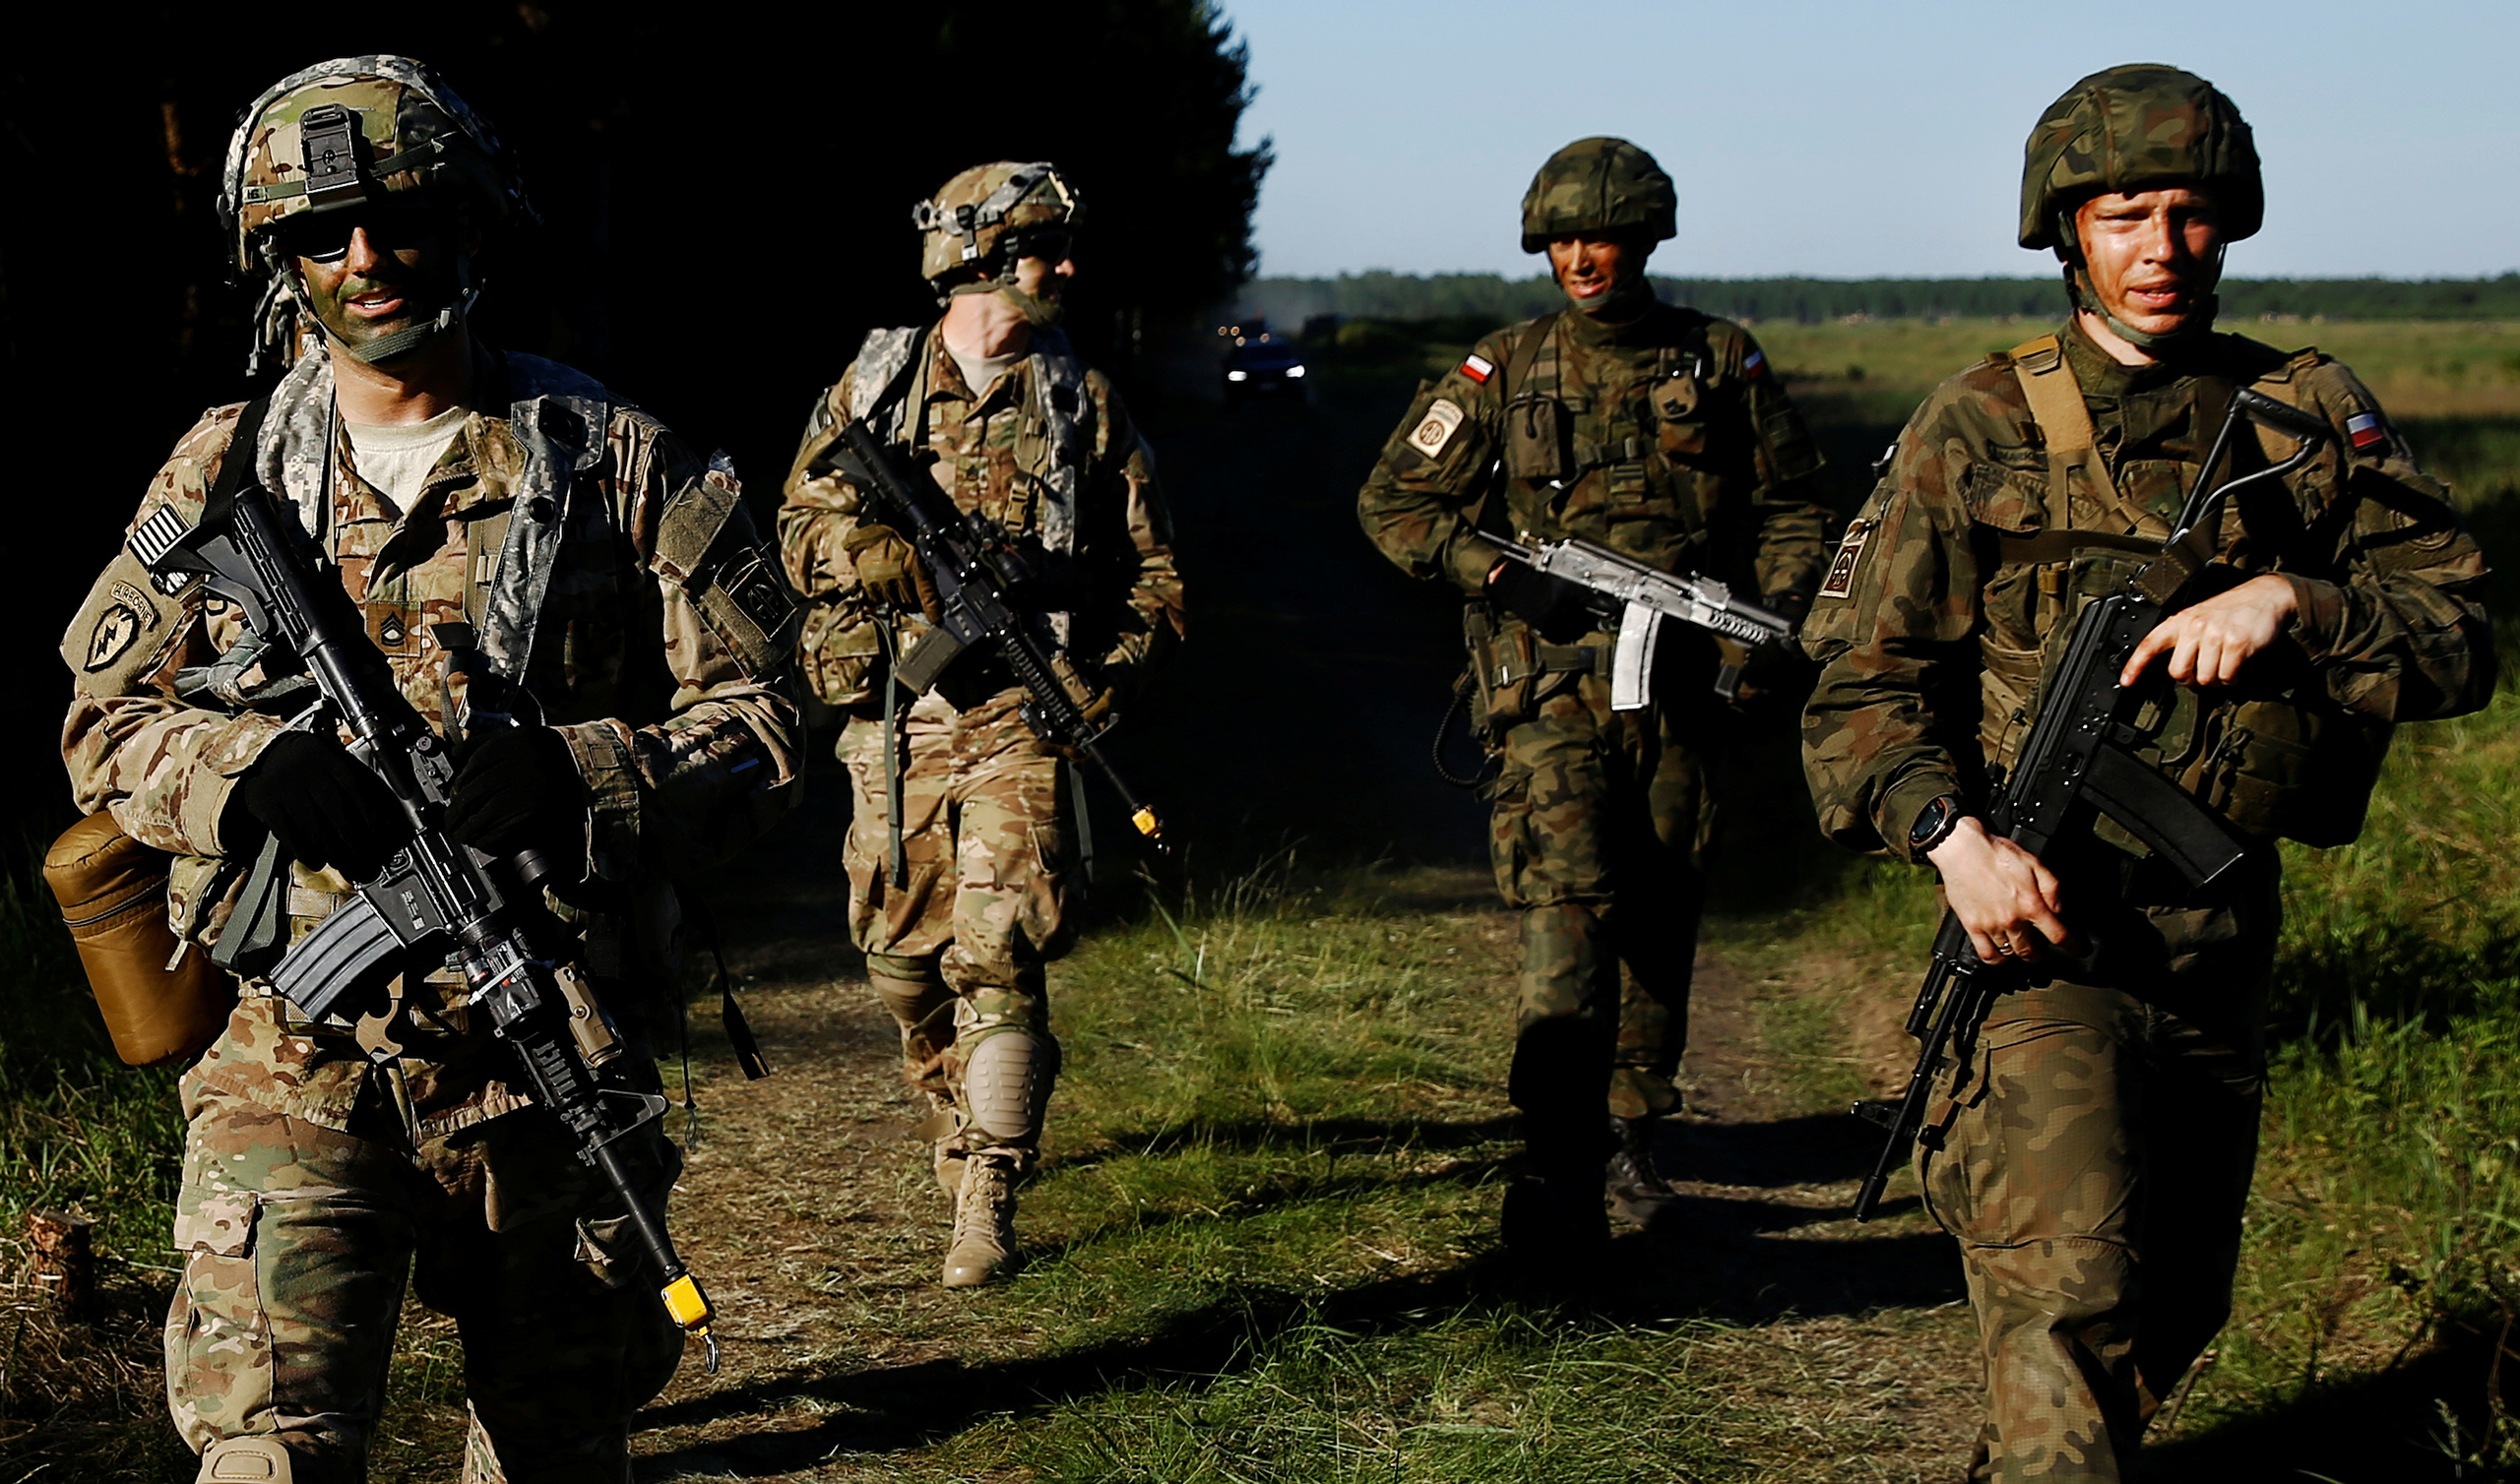 Poland's 6th Airborne Brigade soldiers walk with U.S. 82nd Airborne Division soldiers during the NATO allies' Anakonda 16 exercise near Torun